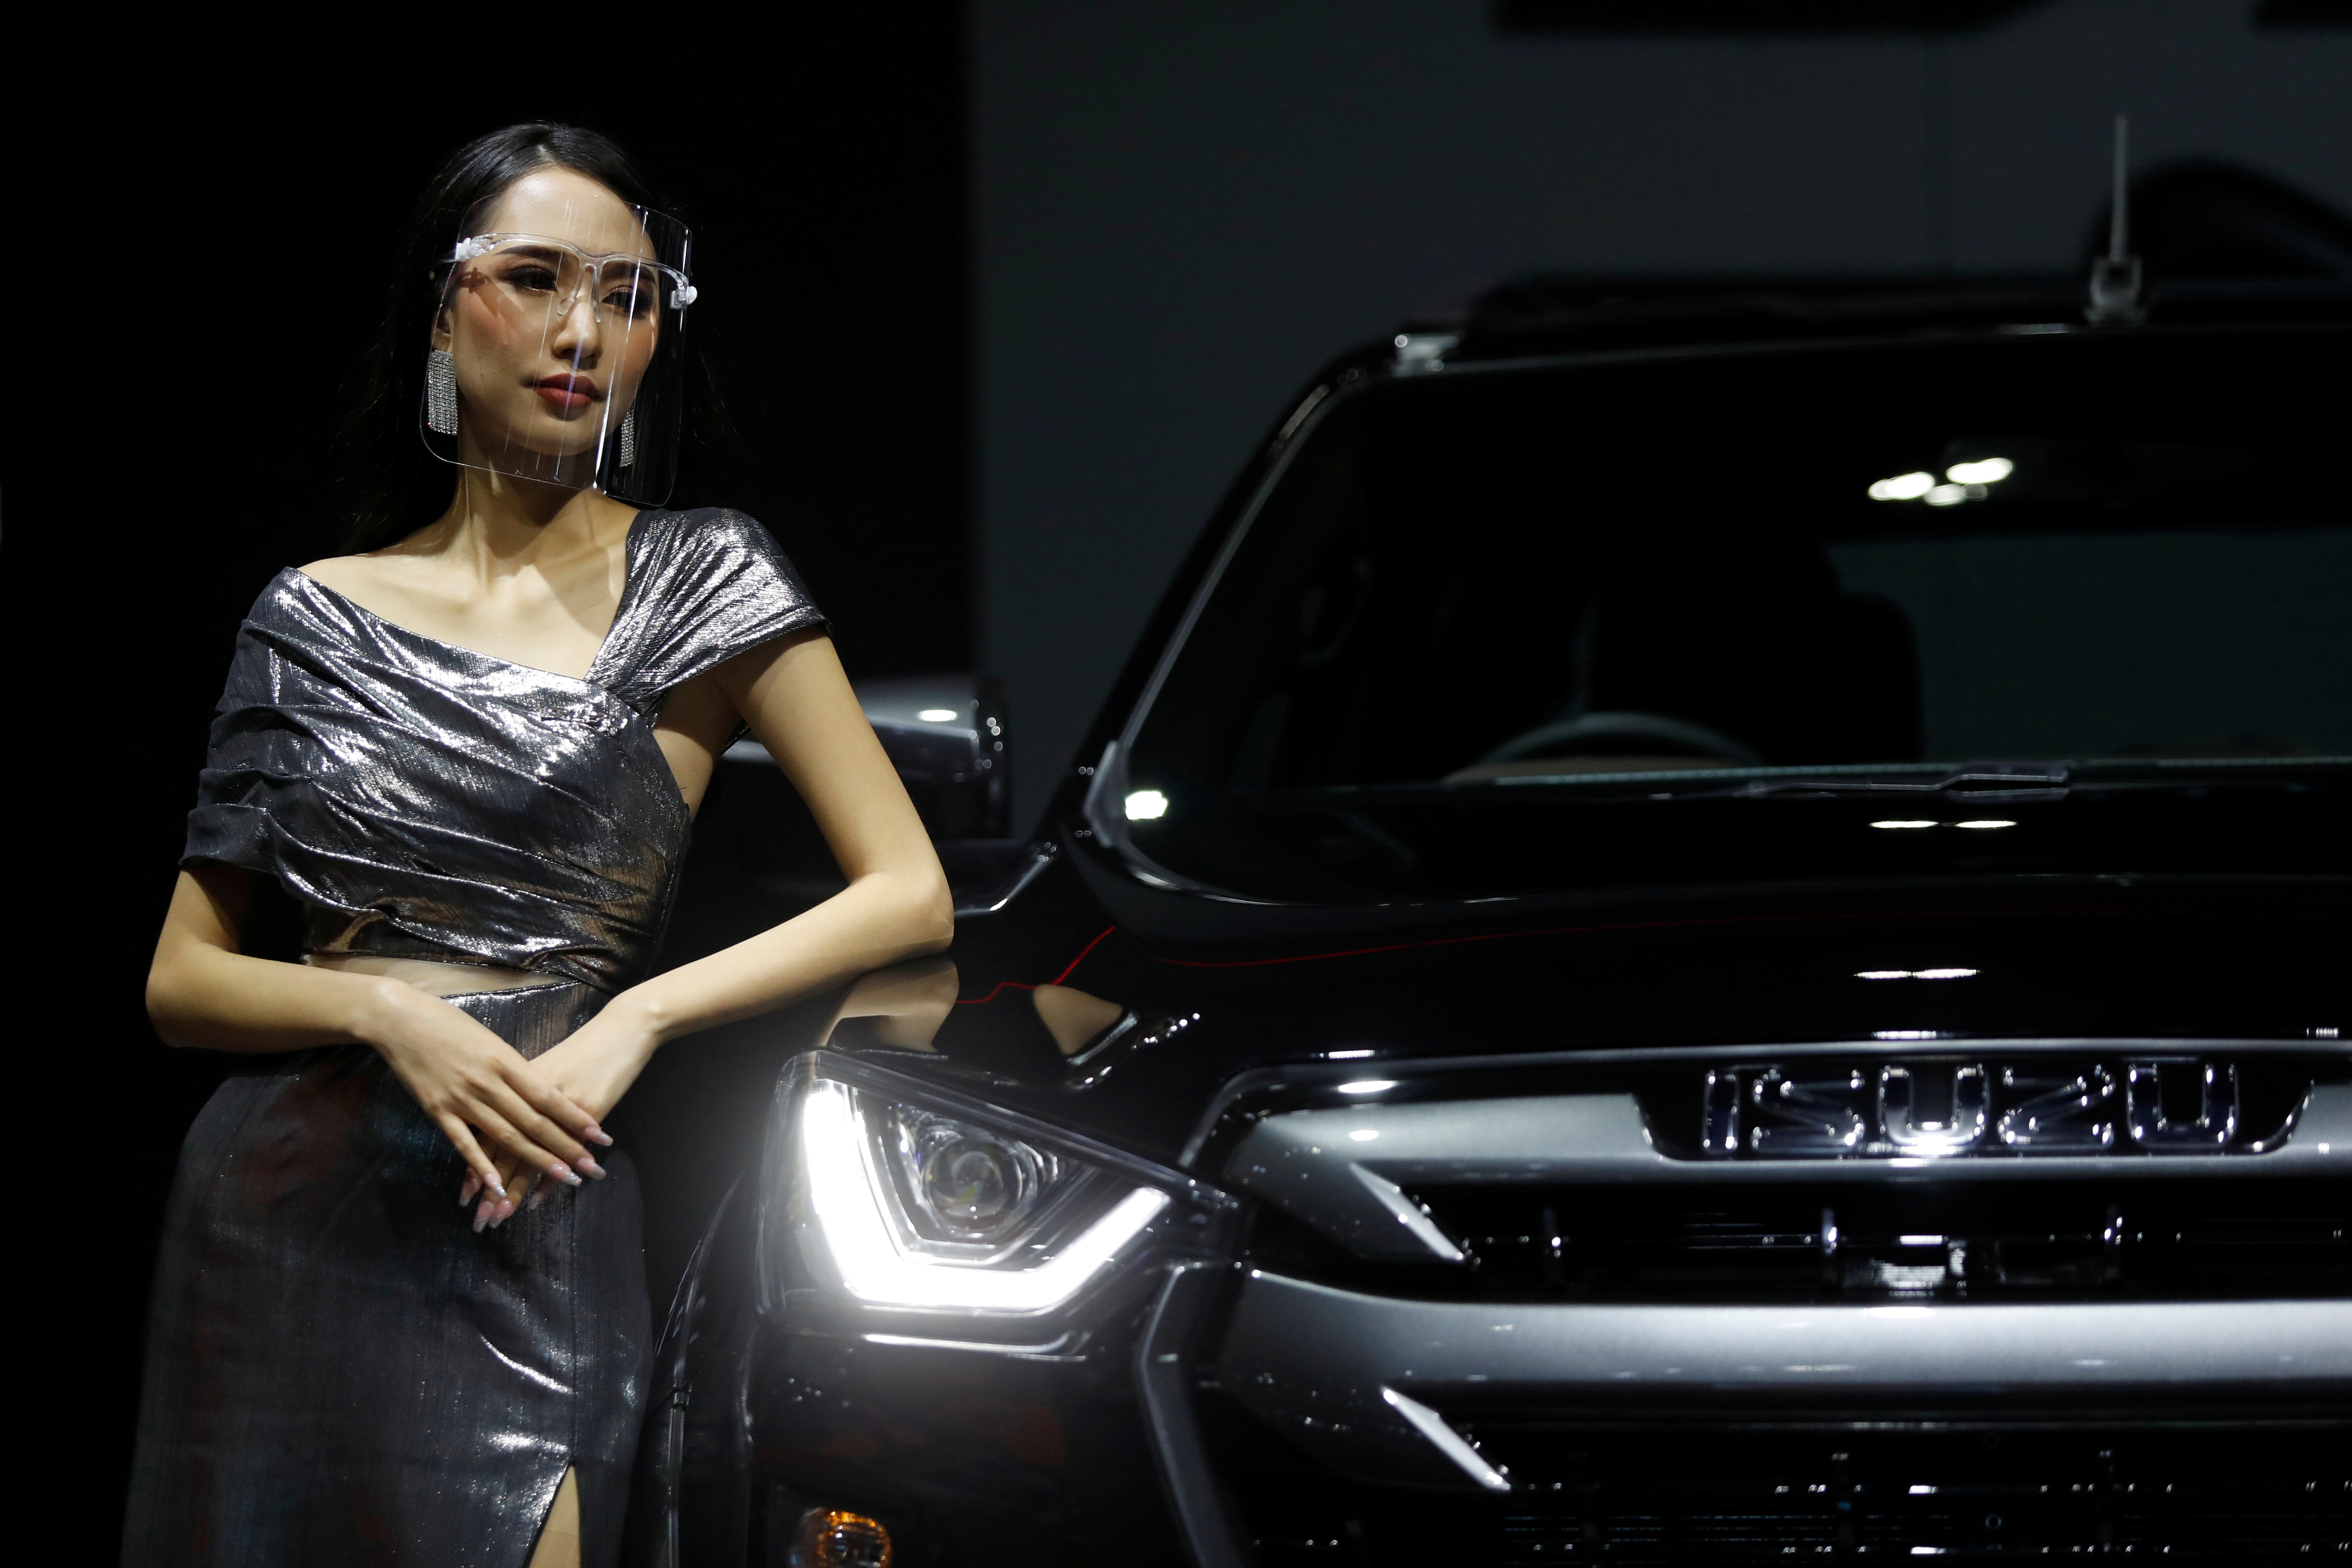 A model leans against a Isuzu vehicle during the media day of the 41st Bangkok International Motor Show after the Thai government eased measures to prevent the spread of the coronavirus disease (COVID-19) in Bangkok, Thailand July 14, 2020. REUTERS/Jorge Silva